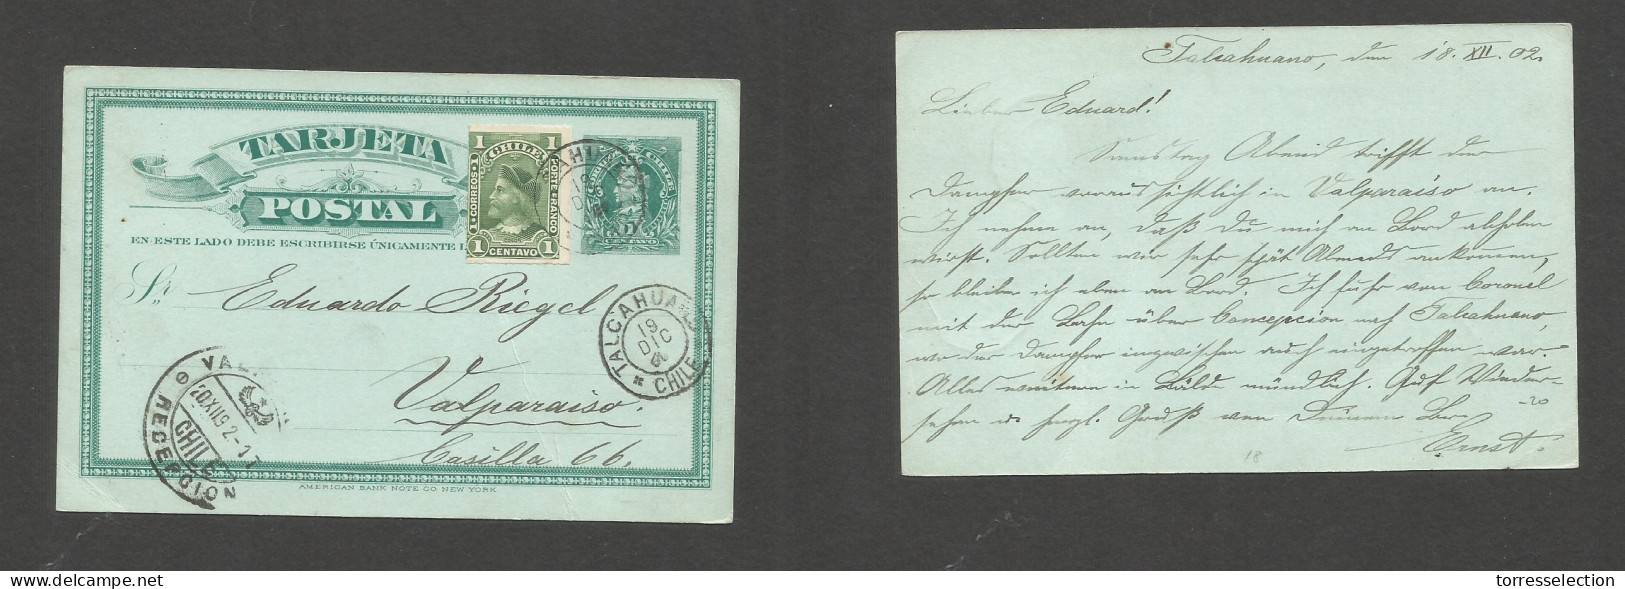 CHILE - Stationery. 1902 (18 Dec) Talcahuano - Valp (20 Dec) 1c Green Stat Card + 1c Green Vert Adtl, Tied Cds. VF Used  - Chile